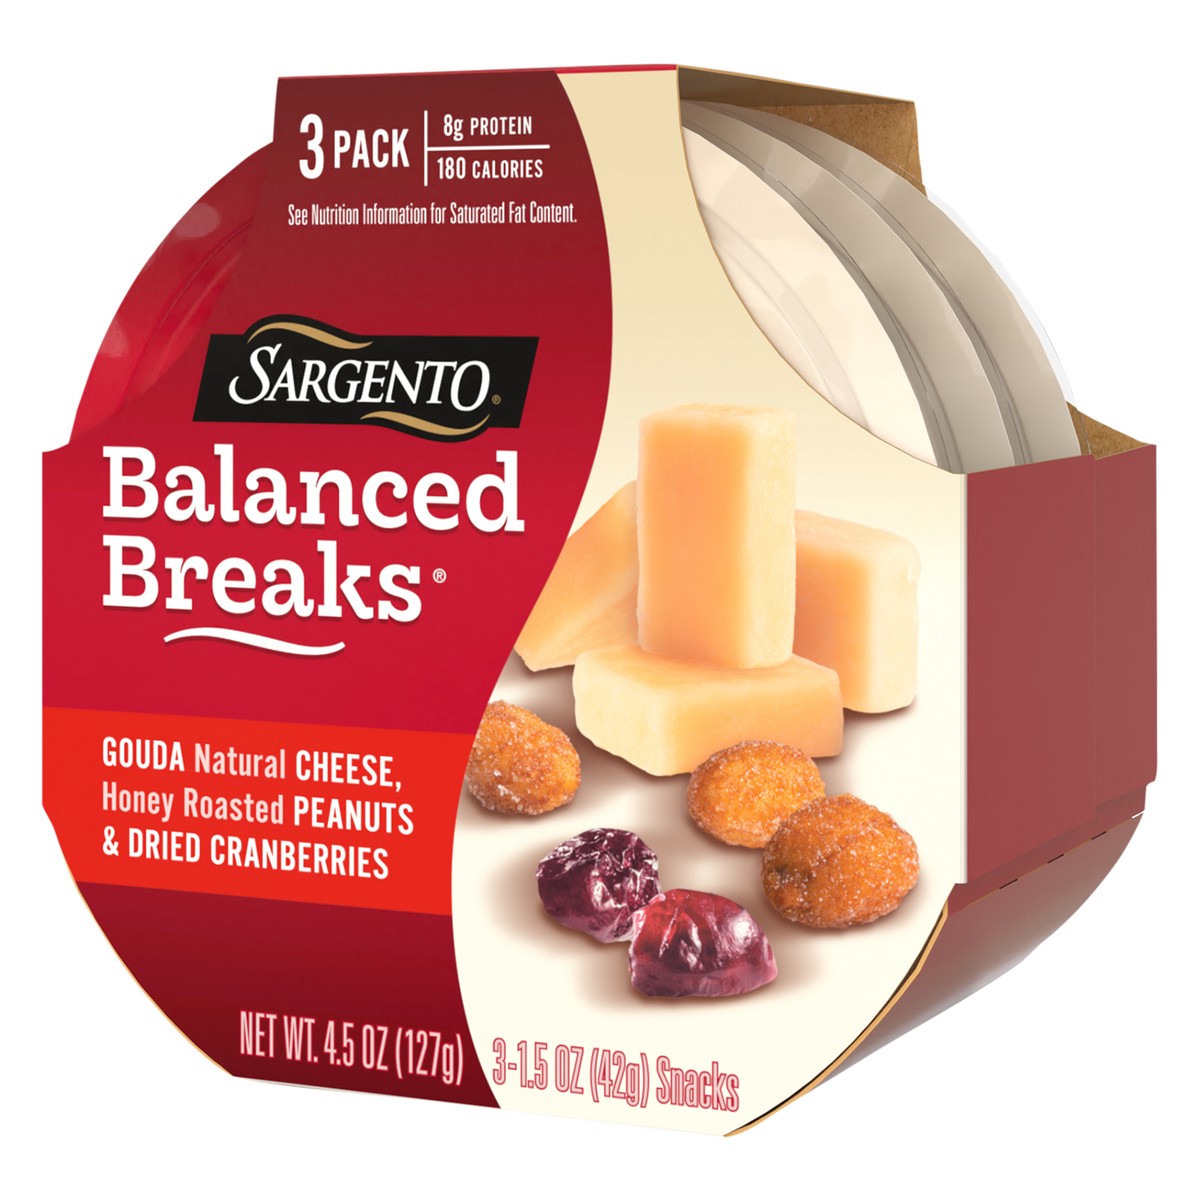 slide 5 of 9, Sargento Balanced Breaks with Gouda Natural Cheese, Honey Roasted Peanuts and Dried Cranberries, 1.5 oz., 3-Pack, 3 ct; 1.5 oz